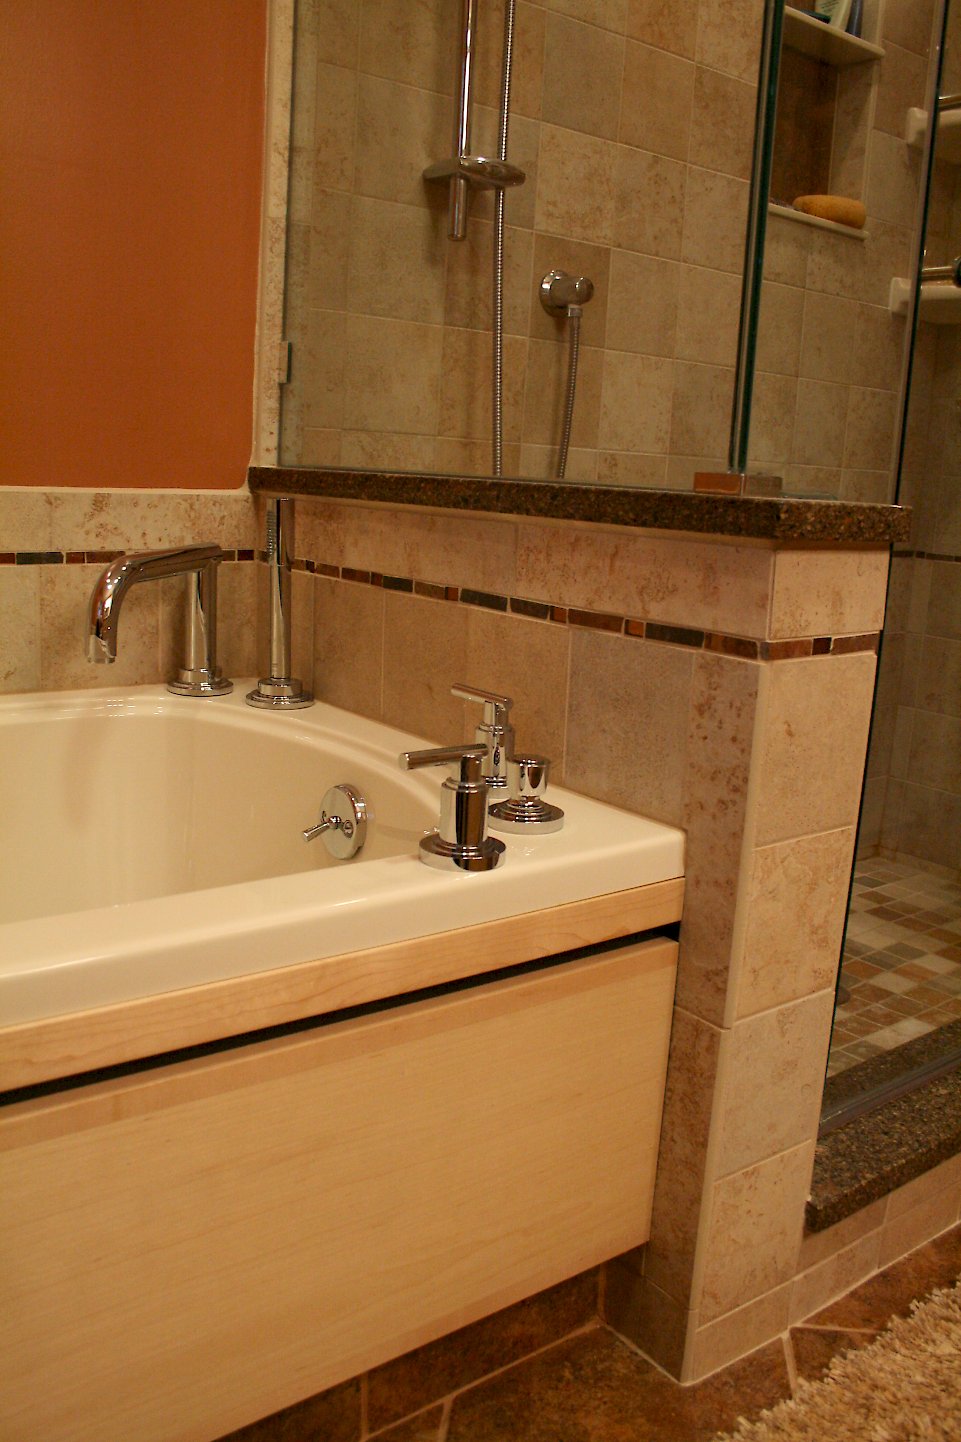 Deck mounted faucets on the tub.